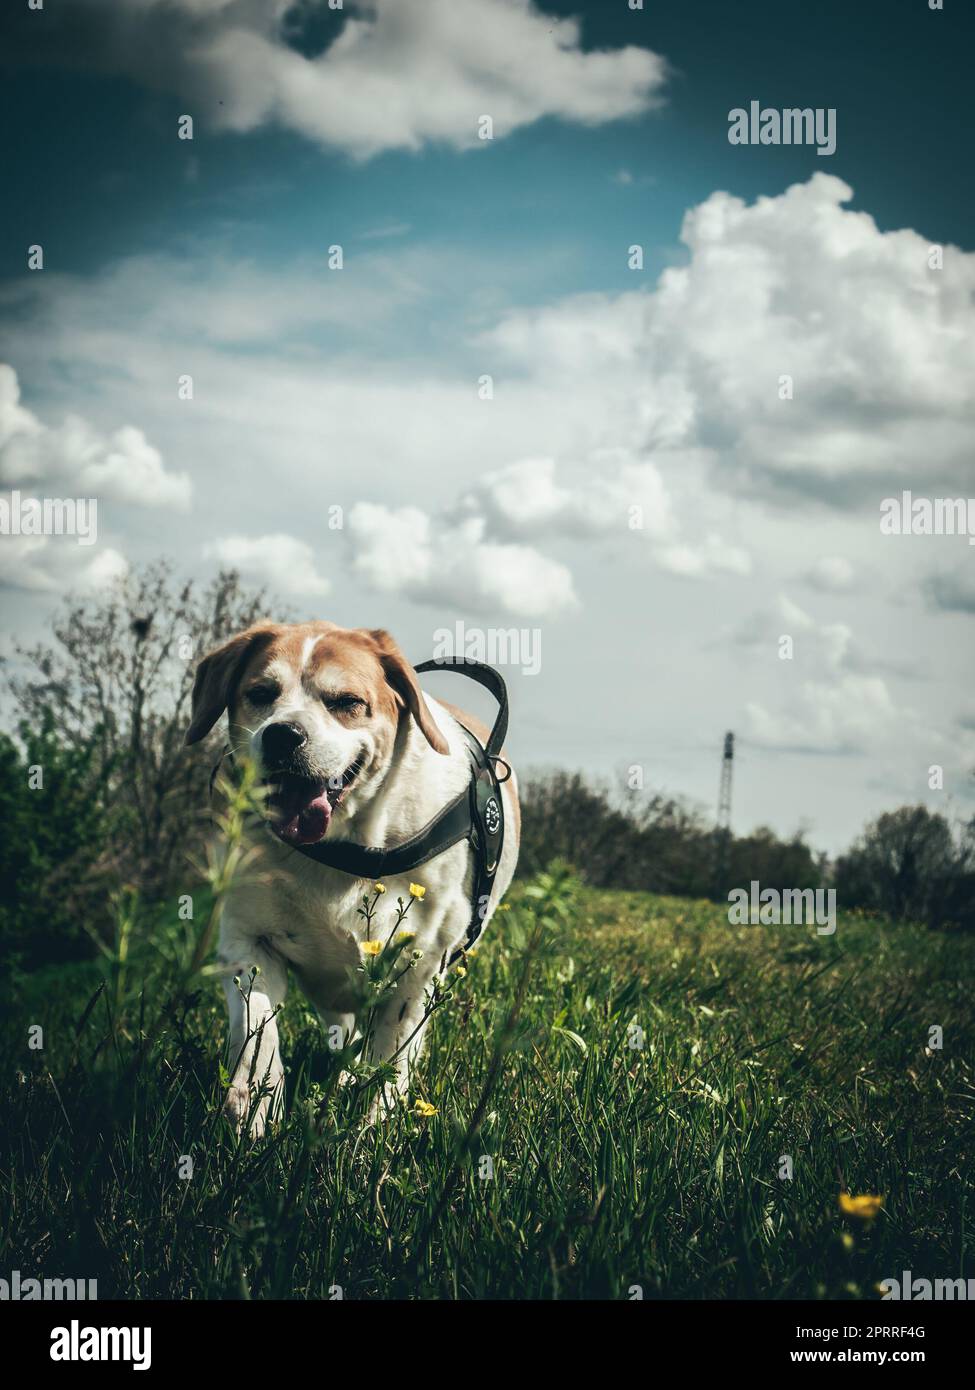 Canine Adventures in the Countryside Stock Photo